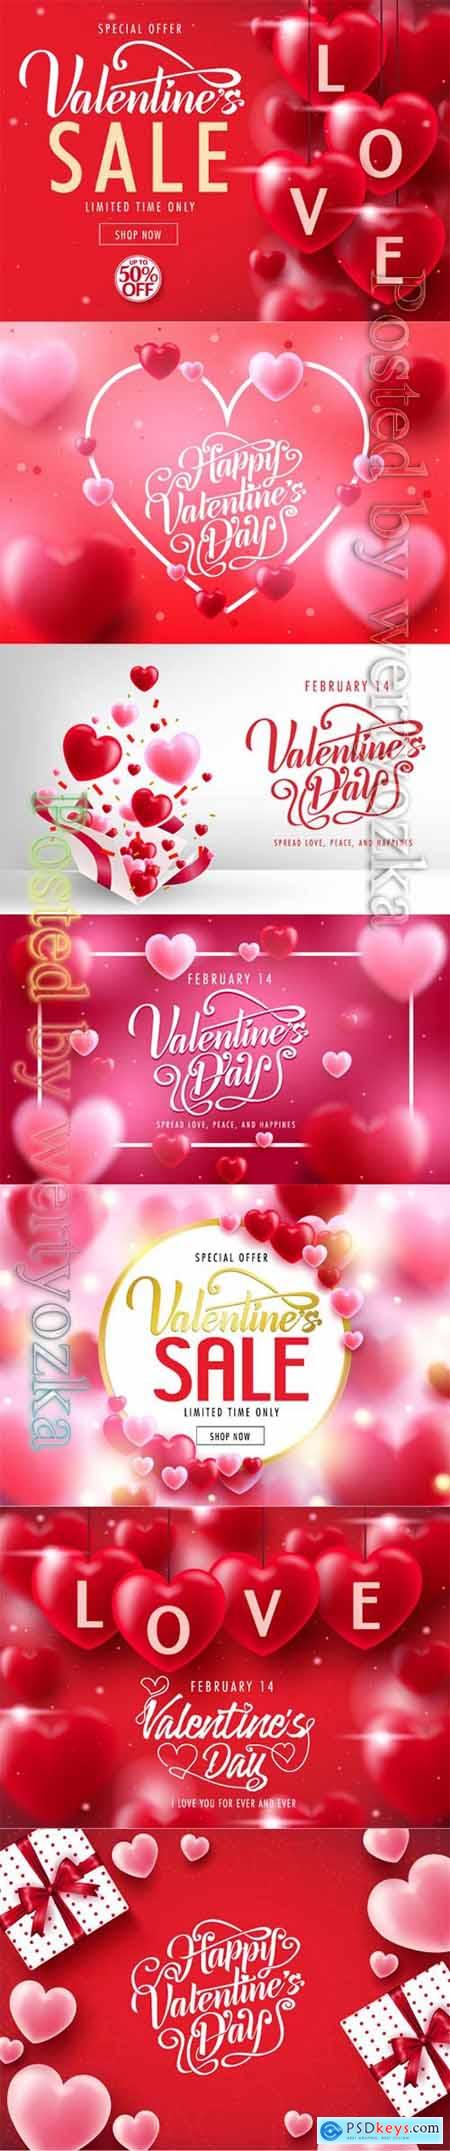 Valentines Day decorative lovely greeting vector card